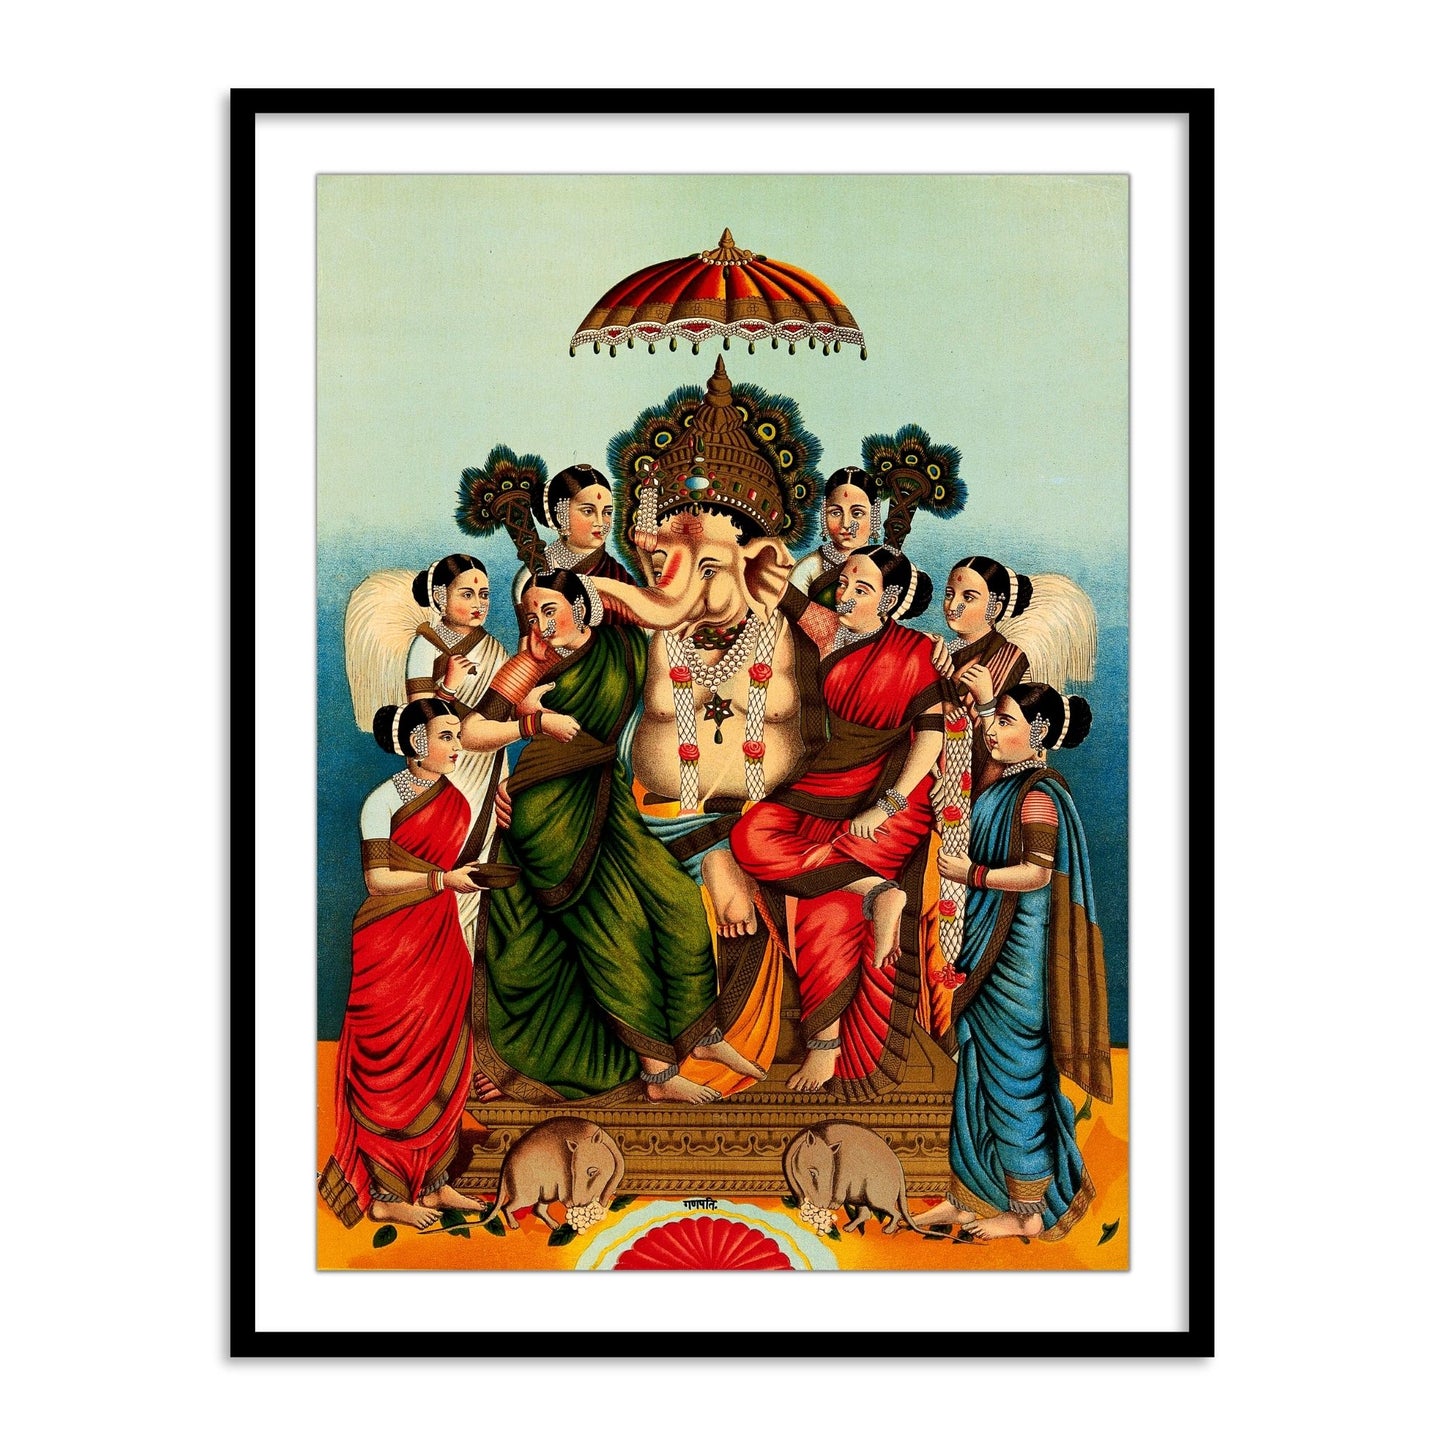 Ganesha and his Two Wives, Siddhi and Buddhi, Surrounded by Attendants Framed Wall Art